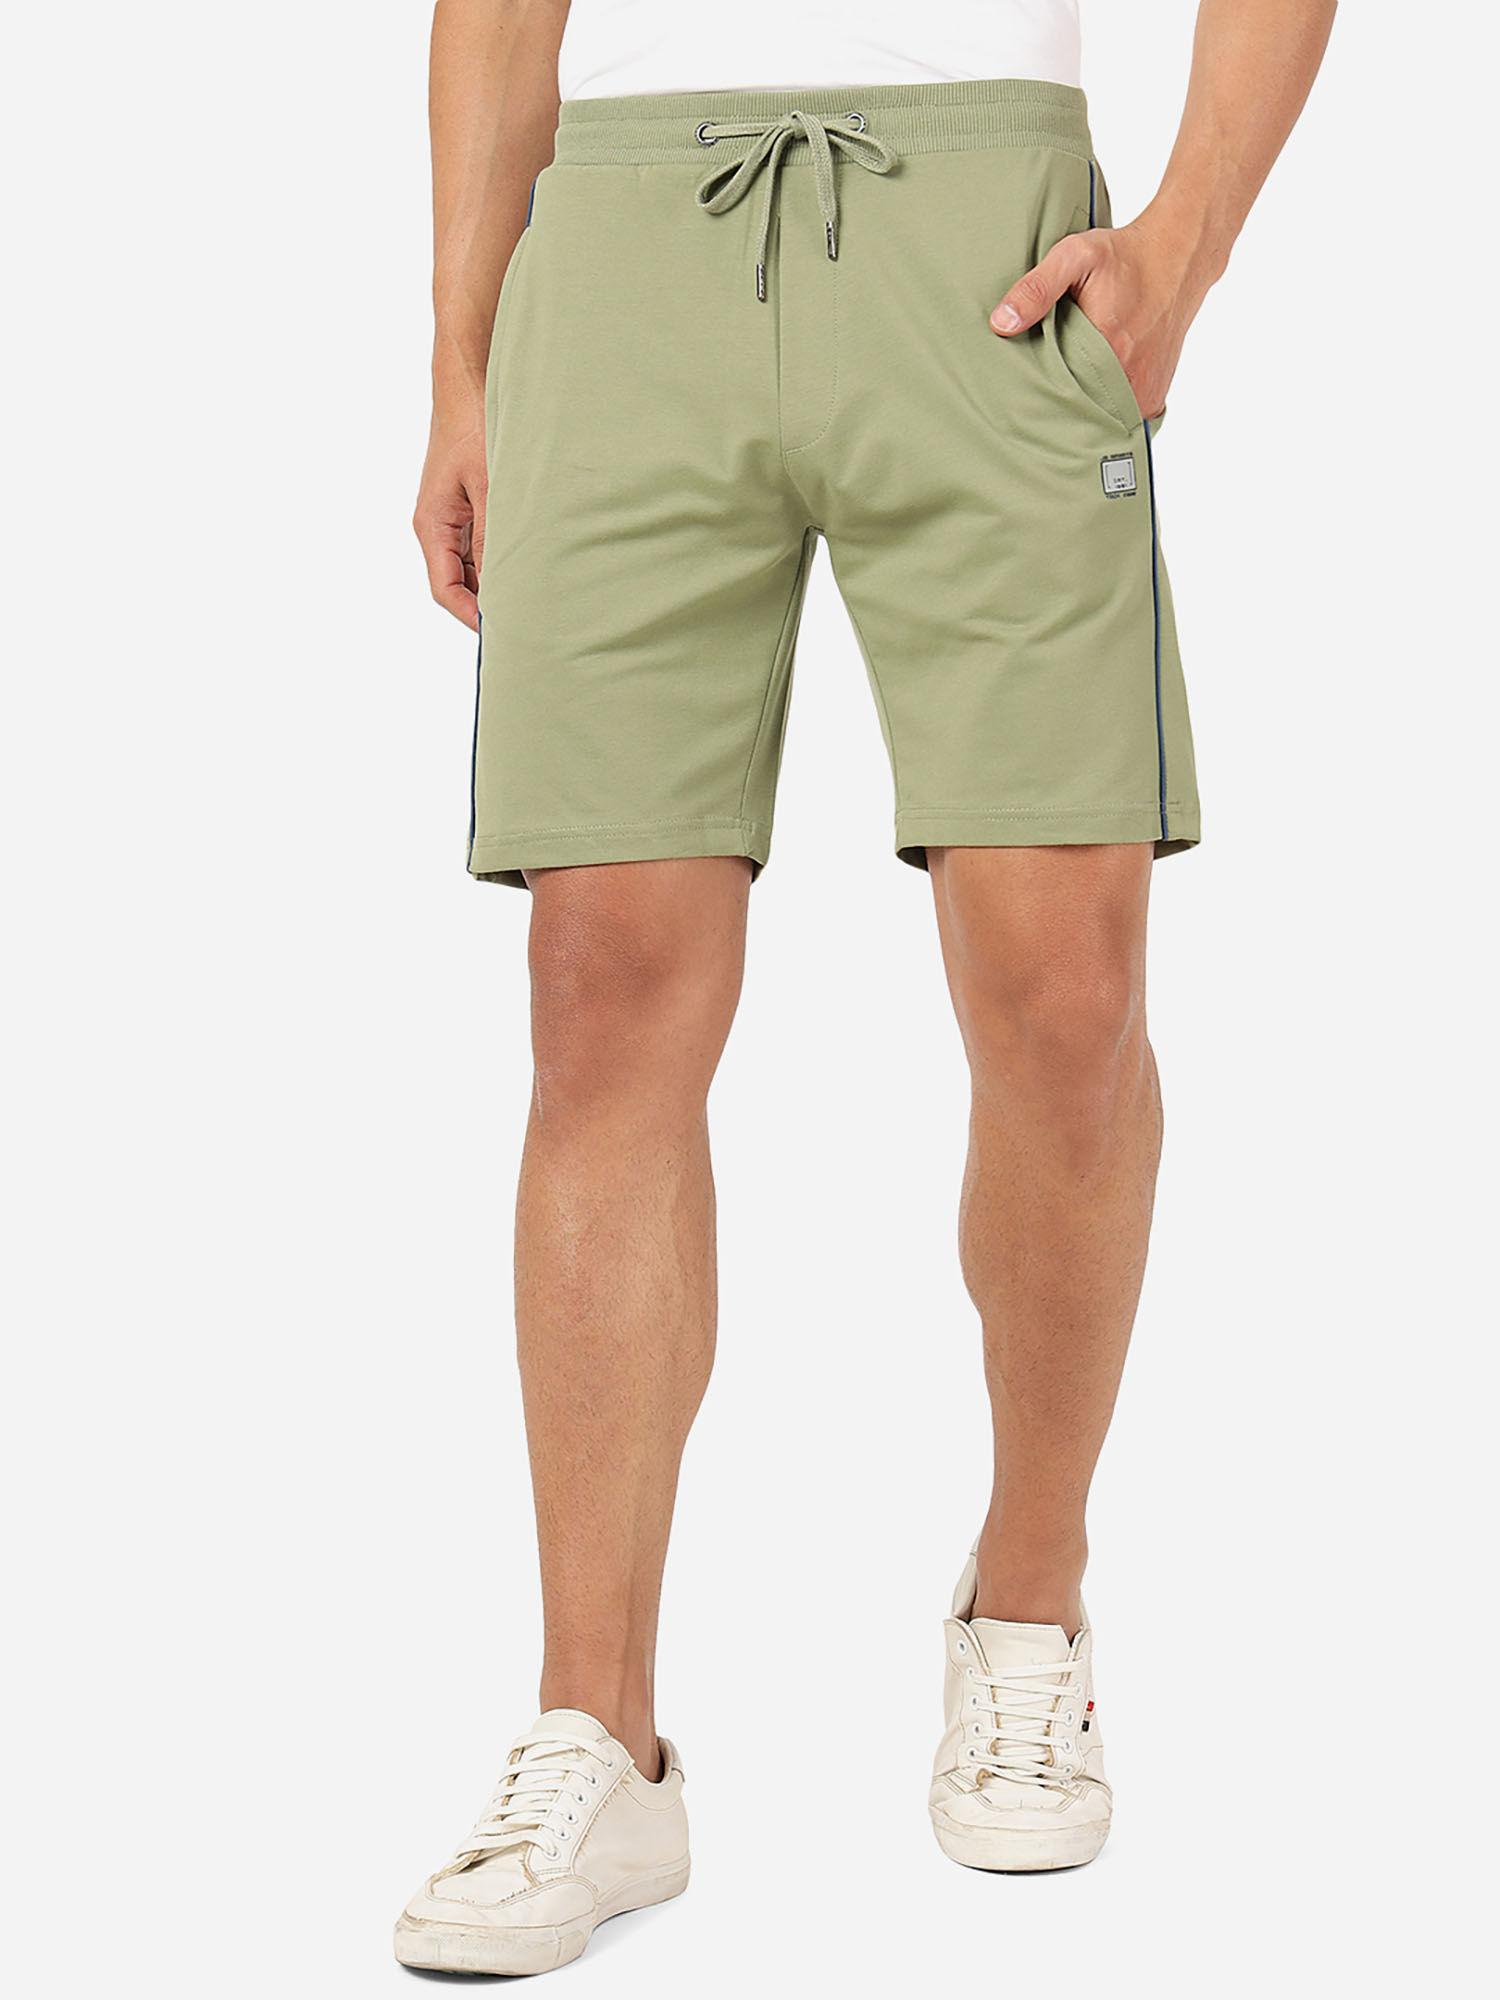 mens-100%-cotton-solid-slim-fit-shorts-olive-green